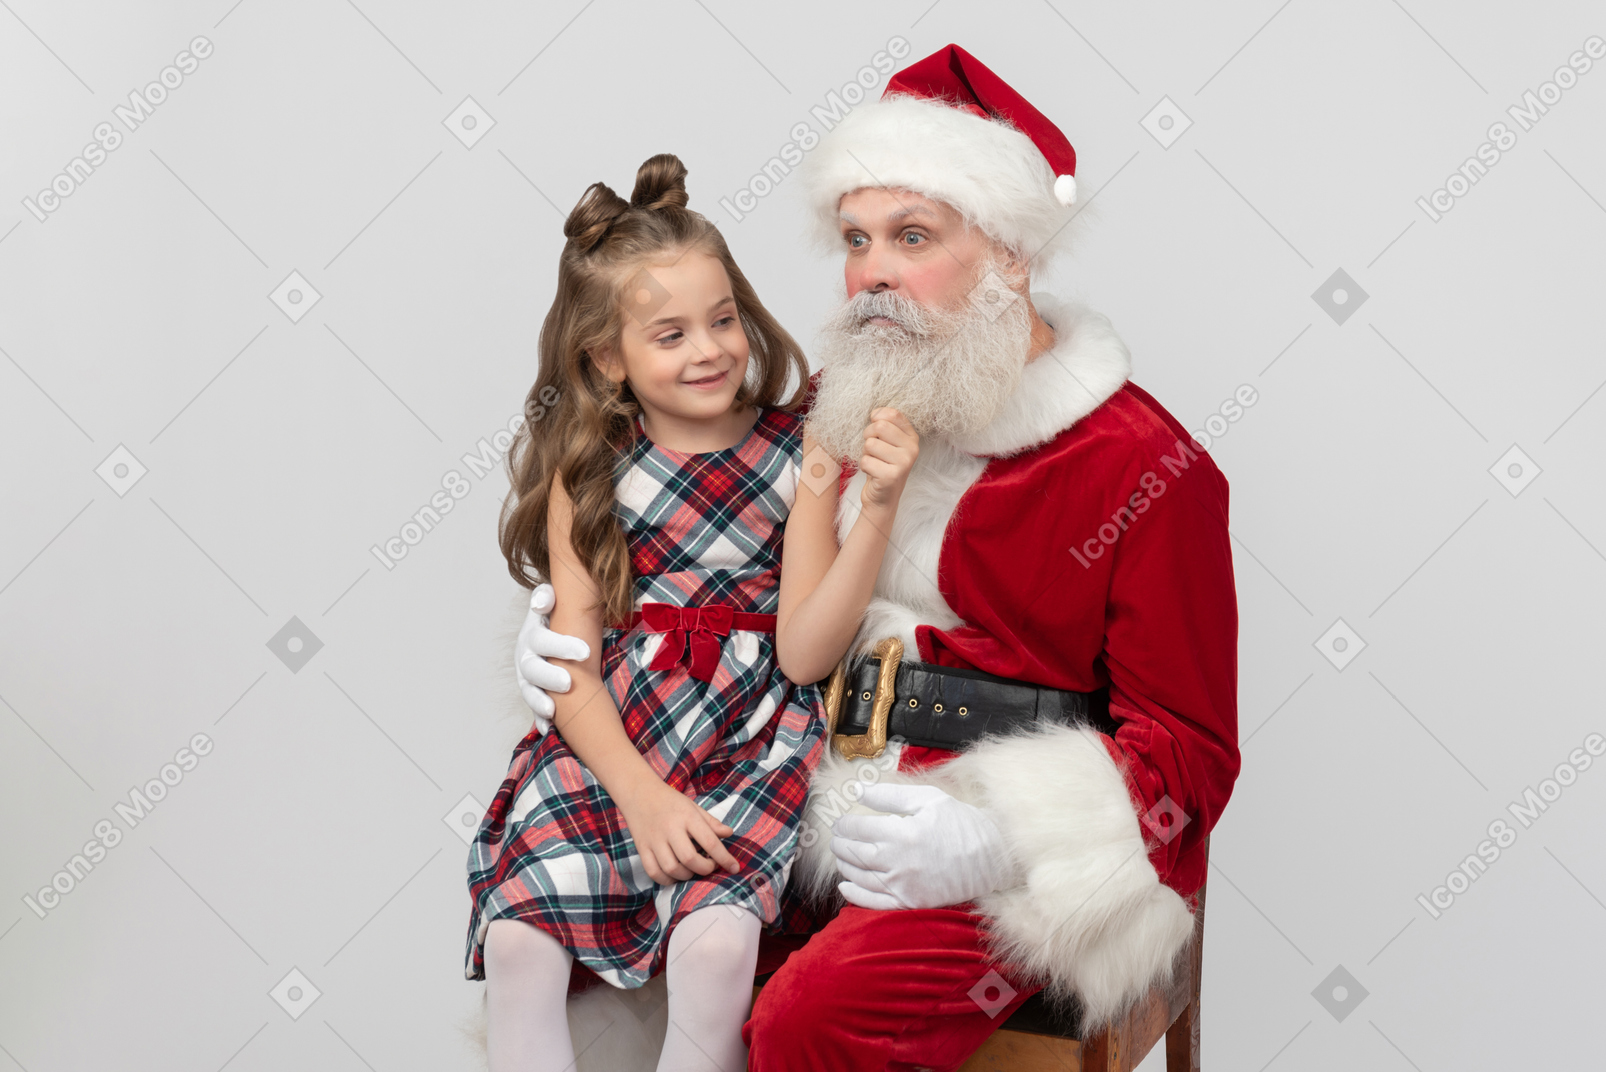 It's not polite to act like this with santa